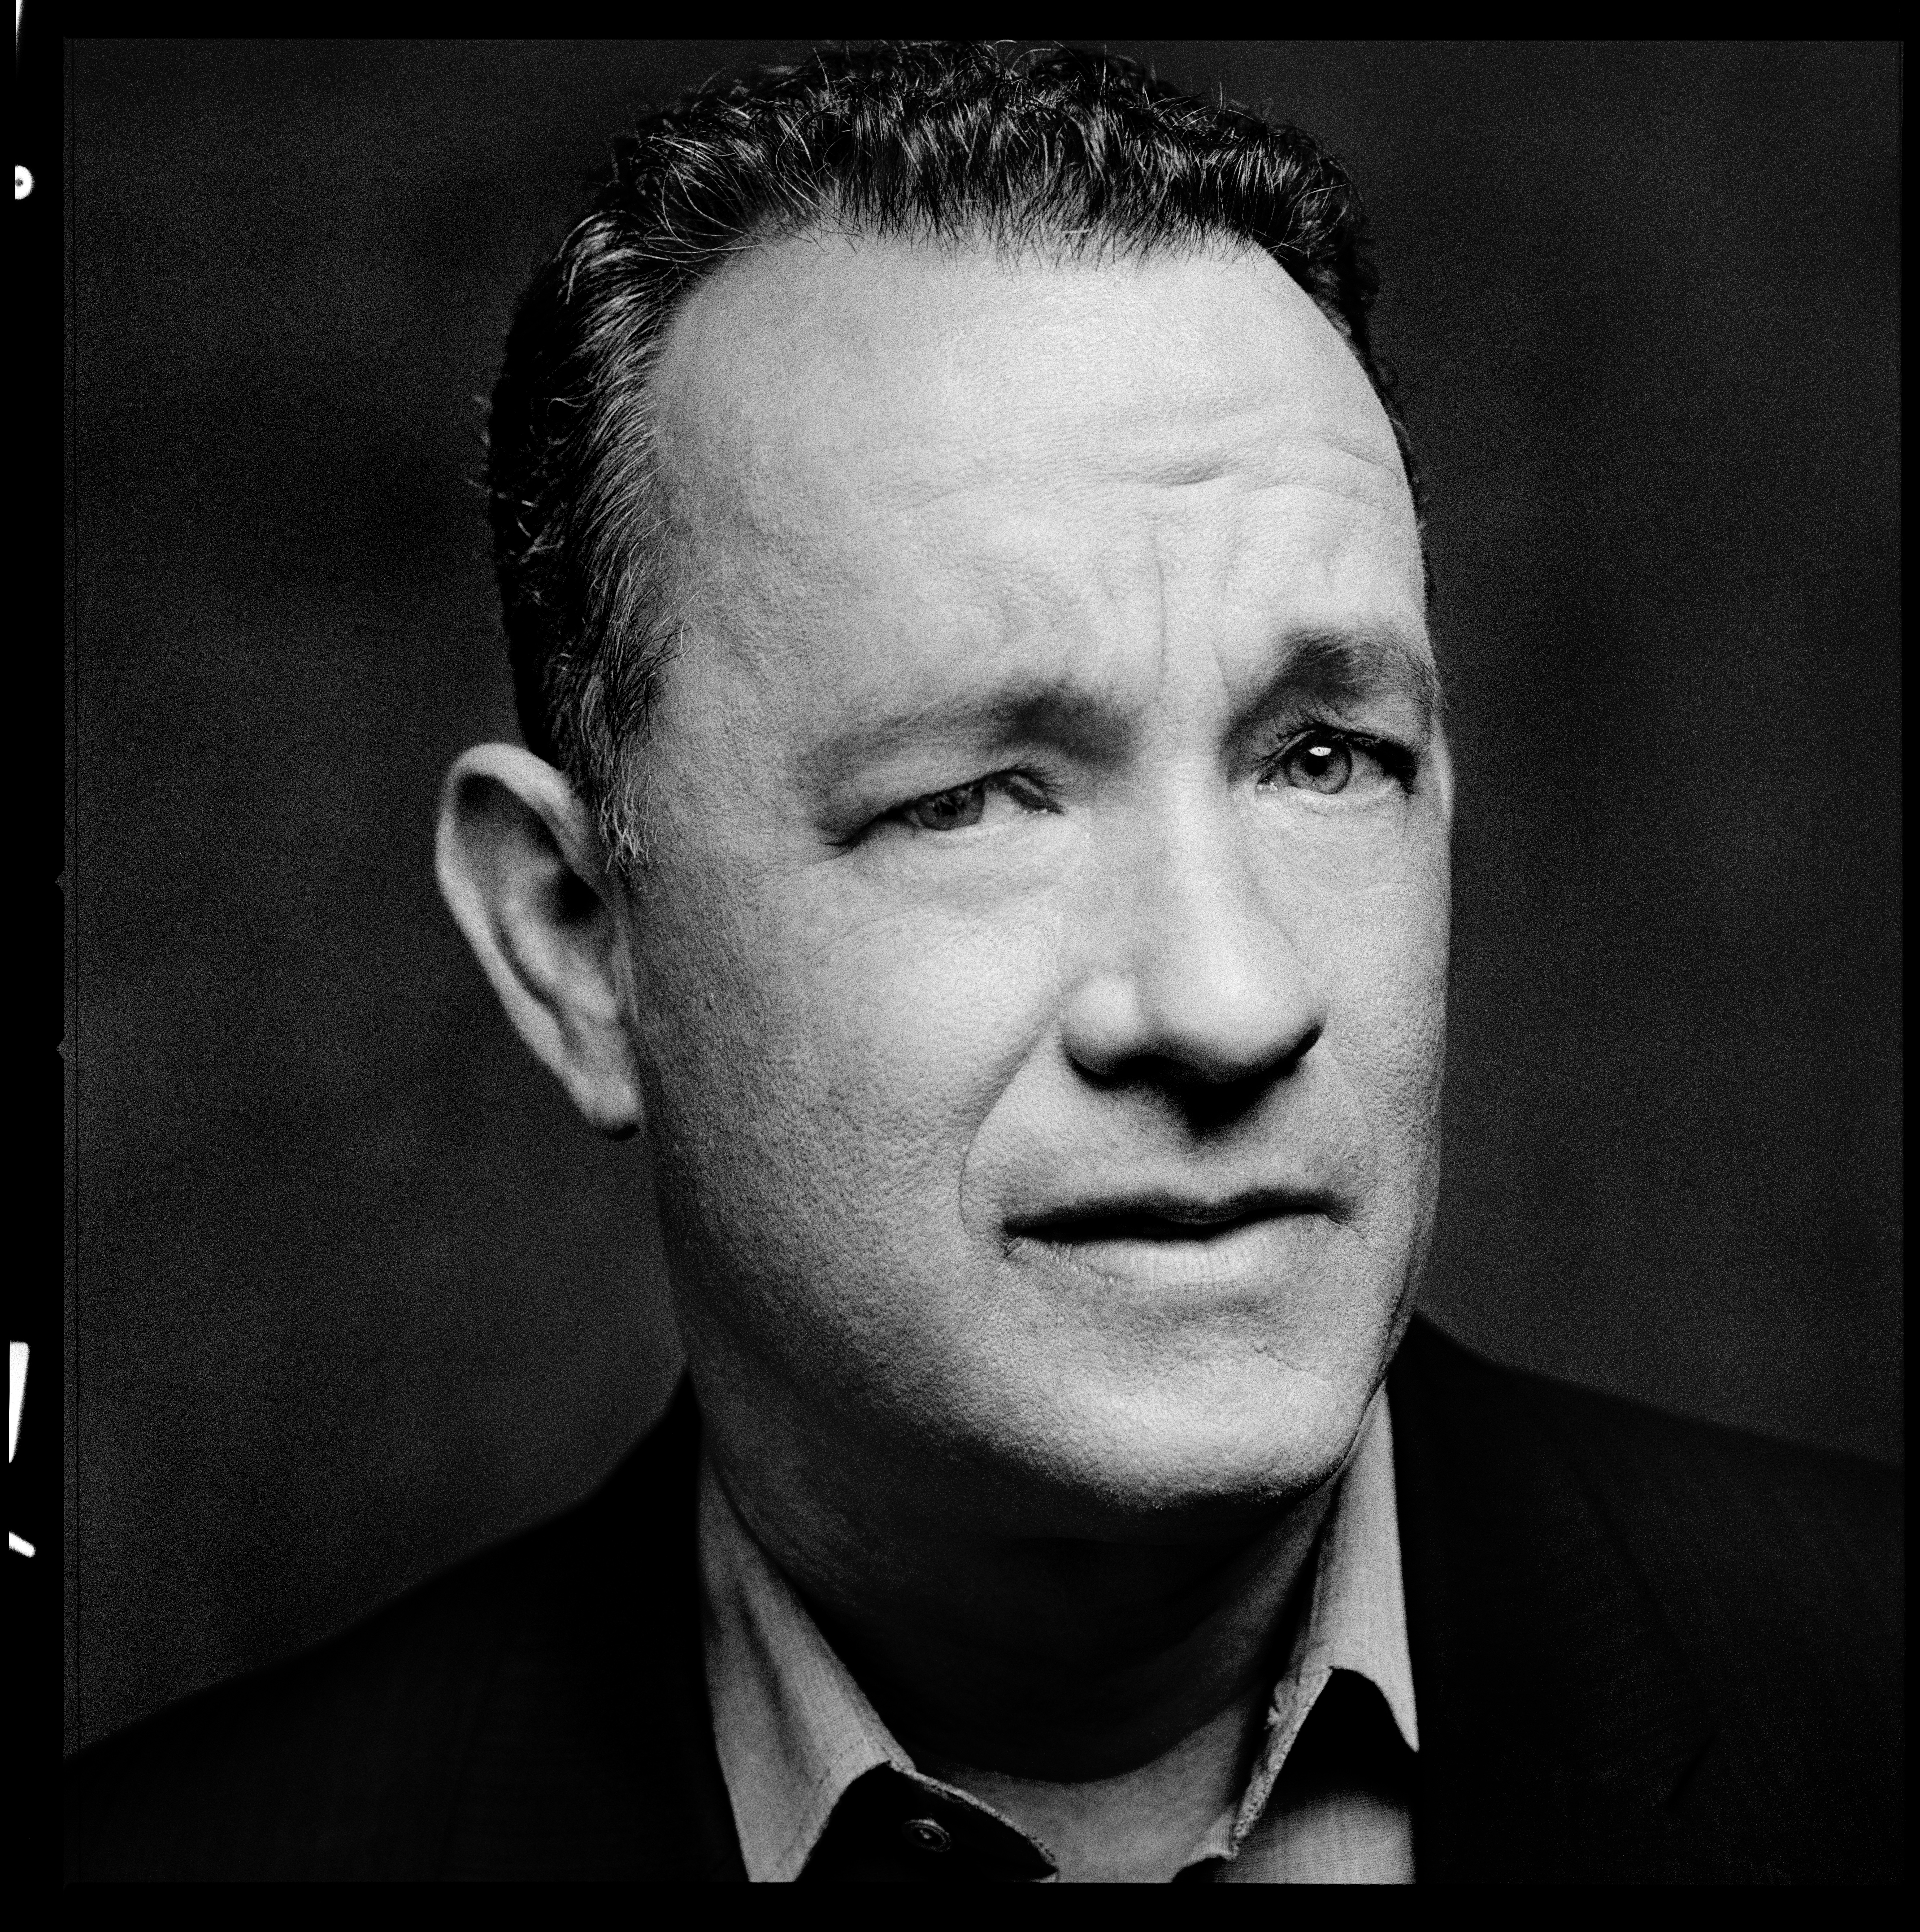 Tom Hanks: Iconic Actor at Carlyle Hotel, New York - Recipient of 2014 Kennedy Center Honors - Jesse Dittmar for The Washington Post, October 2014